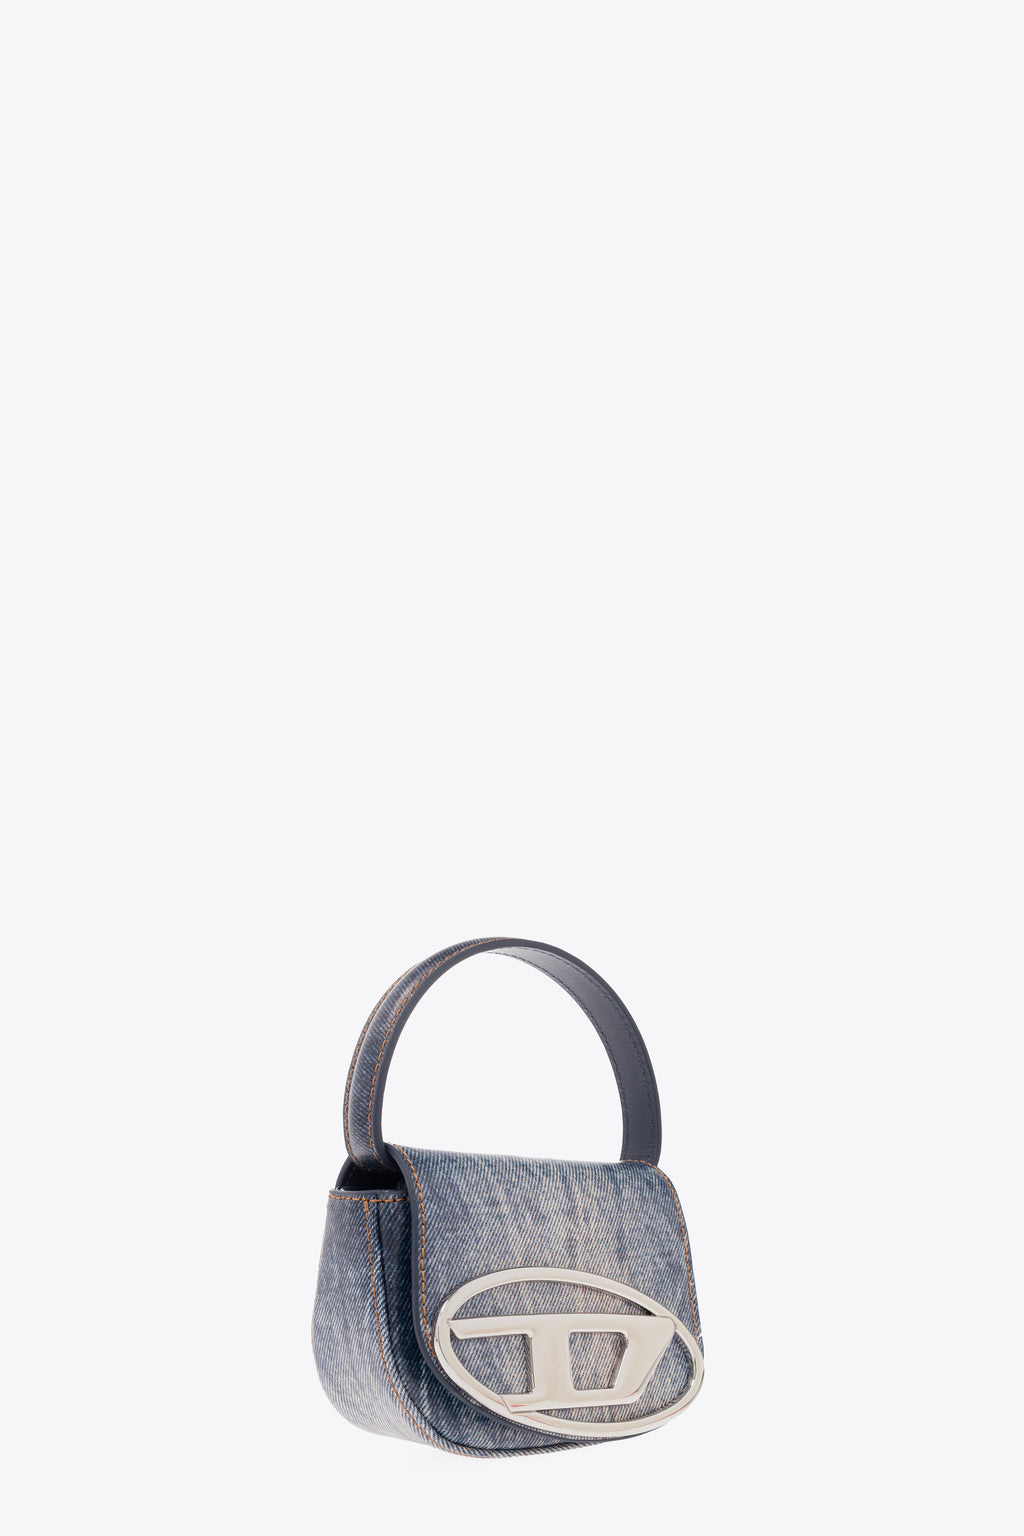 alt-image__Digital-denim-printed-leather-small-bag-with-Oval-D---1DR-XS-Crossbody-Bag--